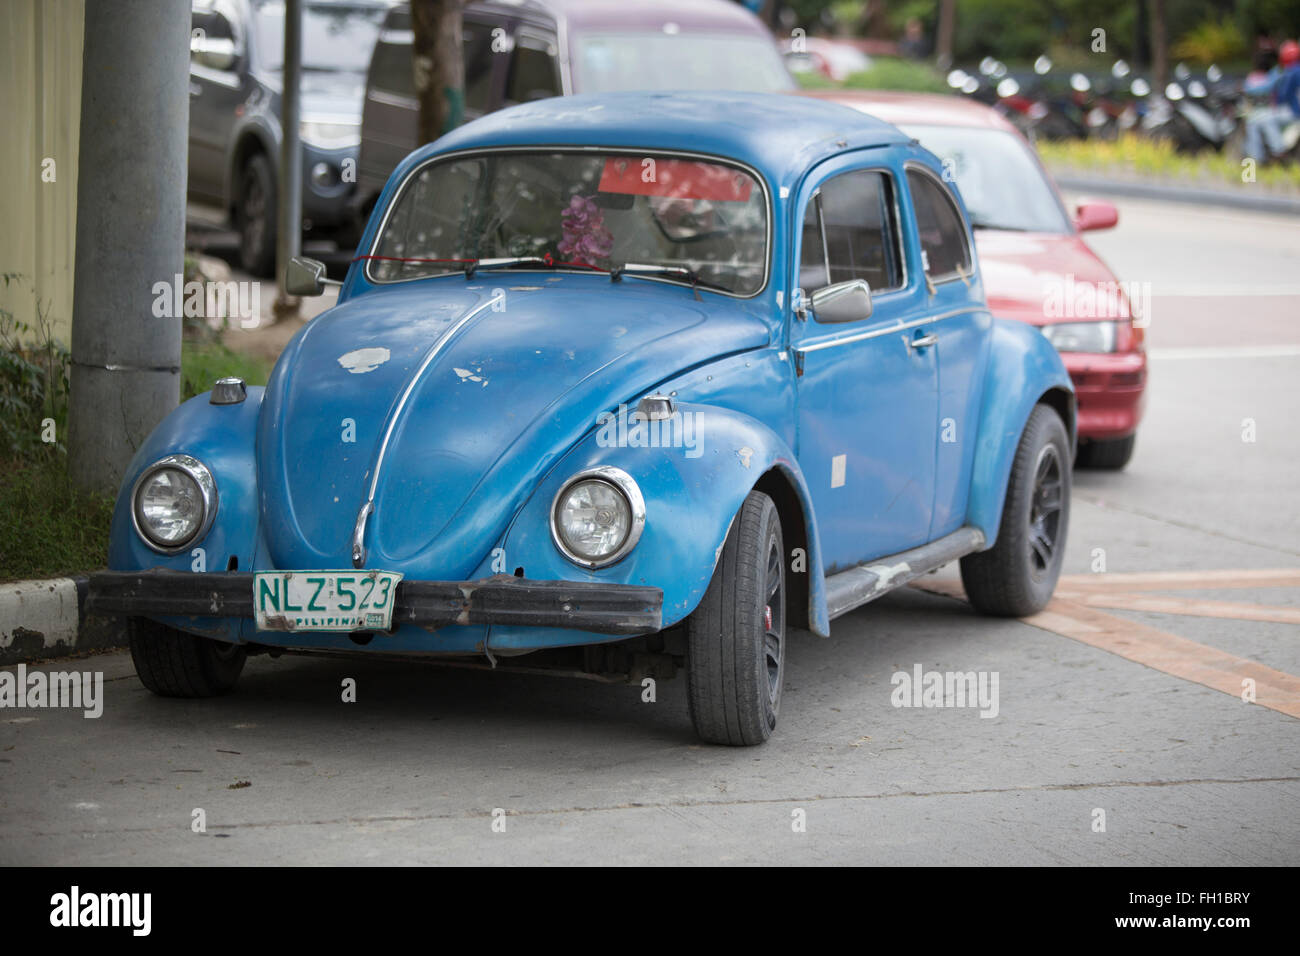 The Volkswagen Beetle,the worlds longest running and most manufactured car. Stock Photo